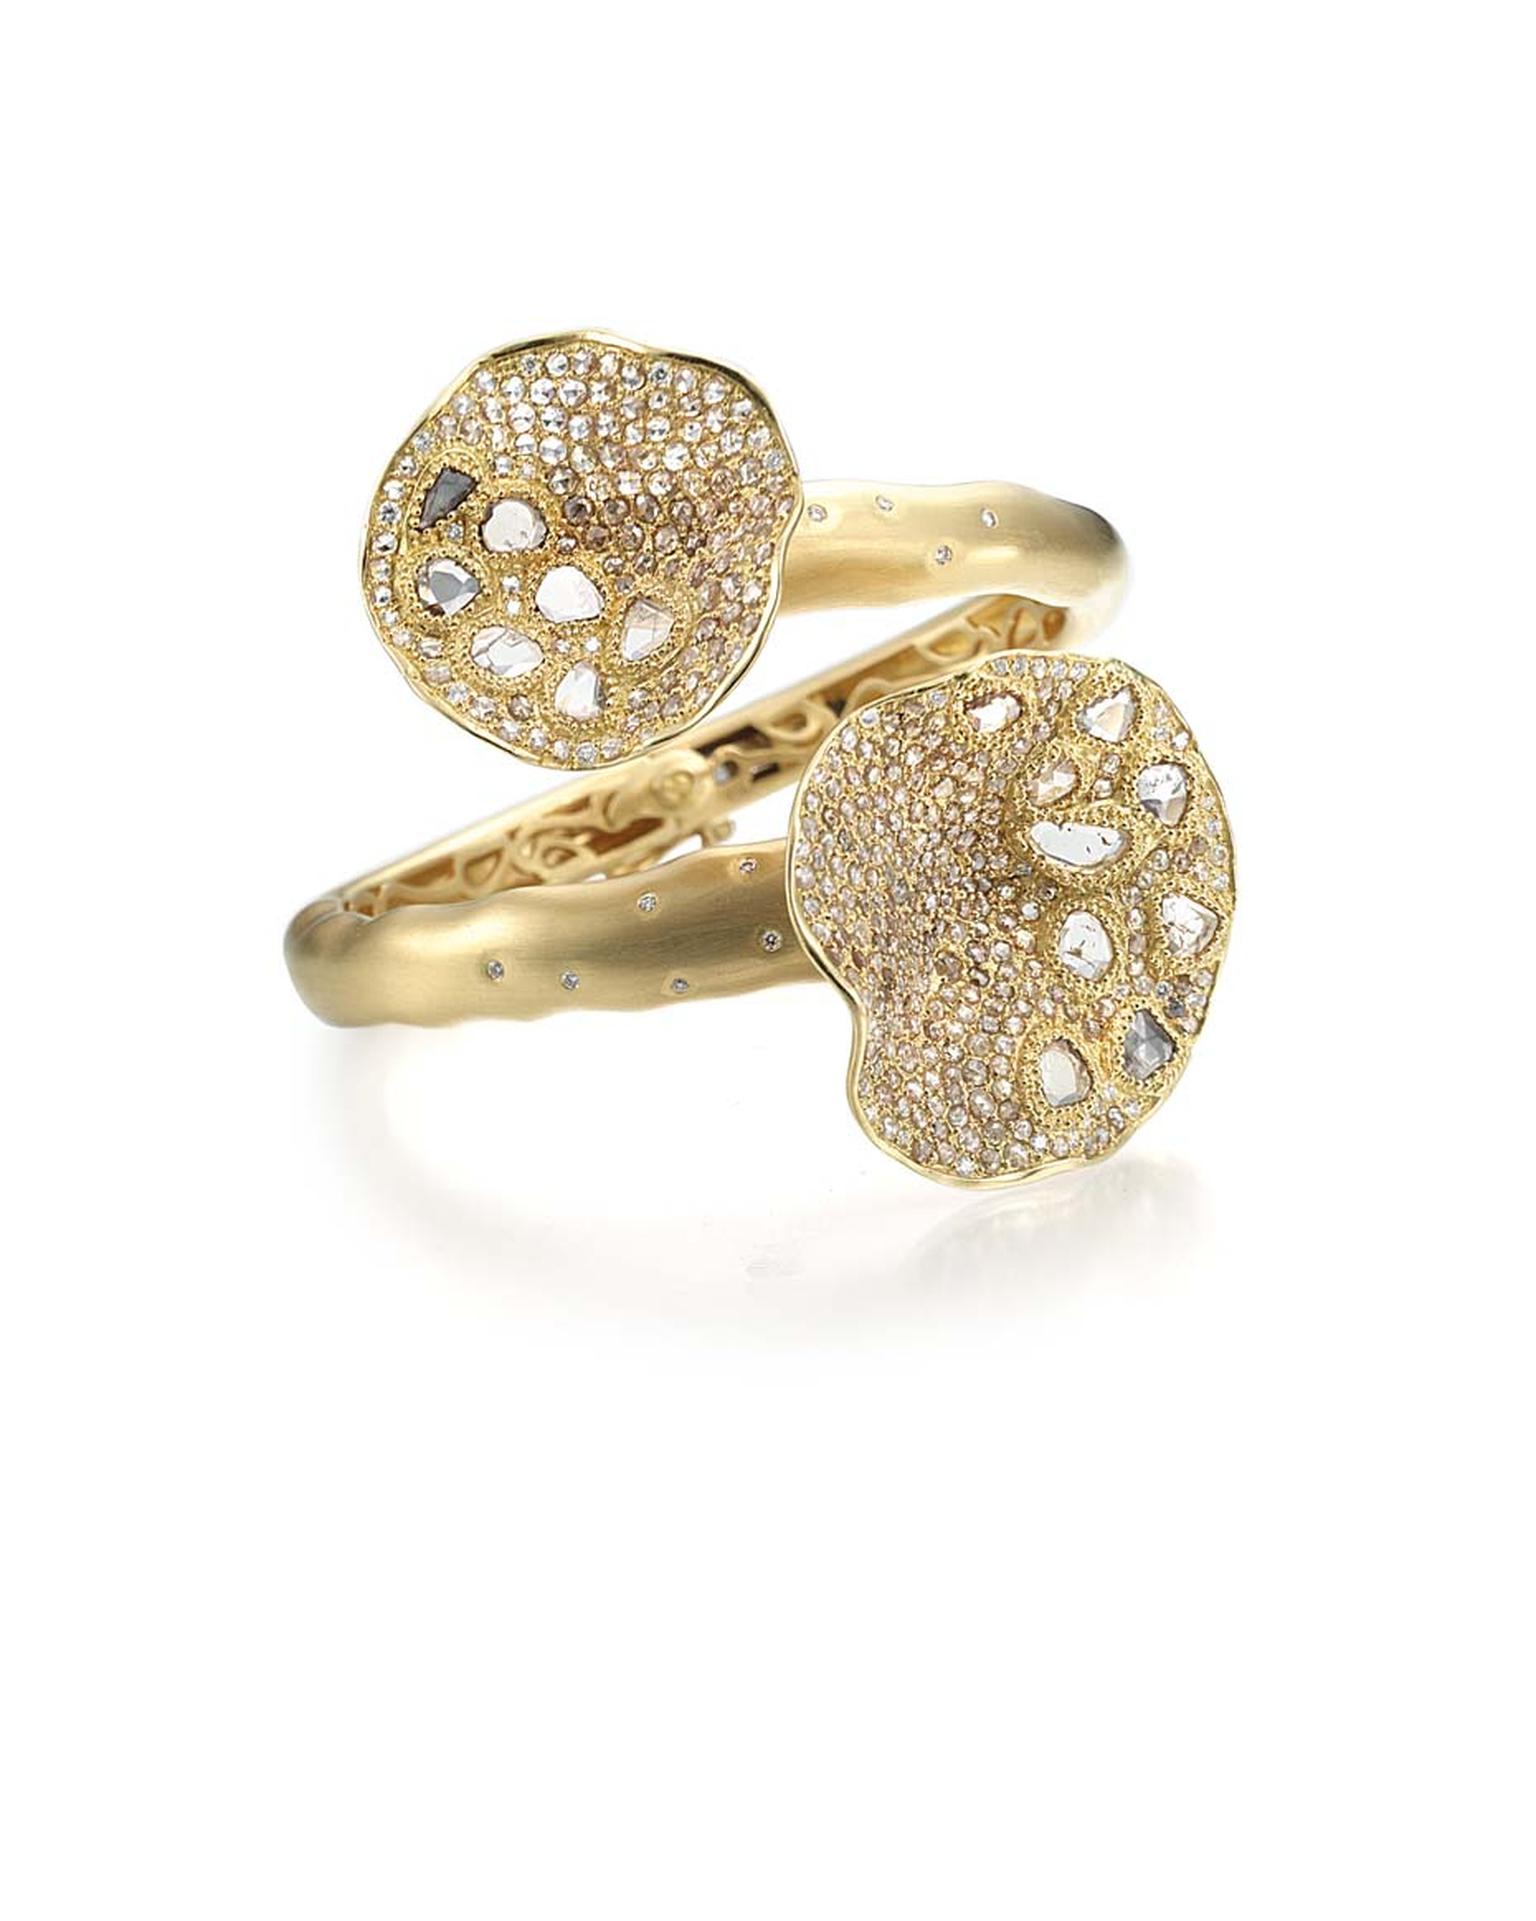 Coomi Serenity Flower ring with gold, brilliant diamonds and rose-cut diamond paisley.